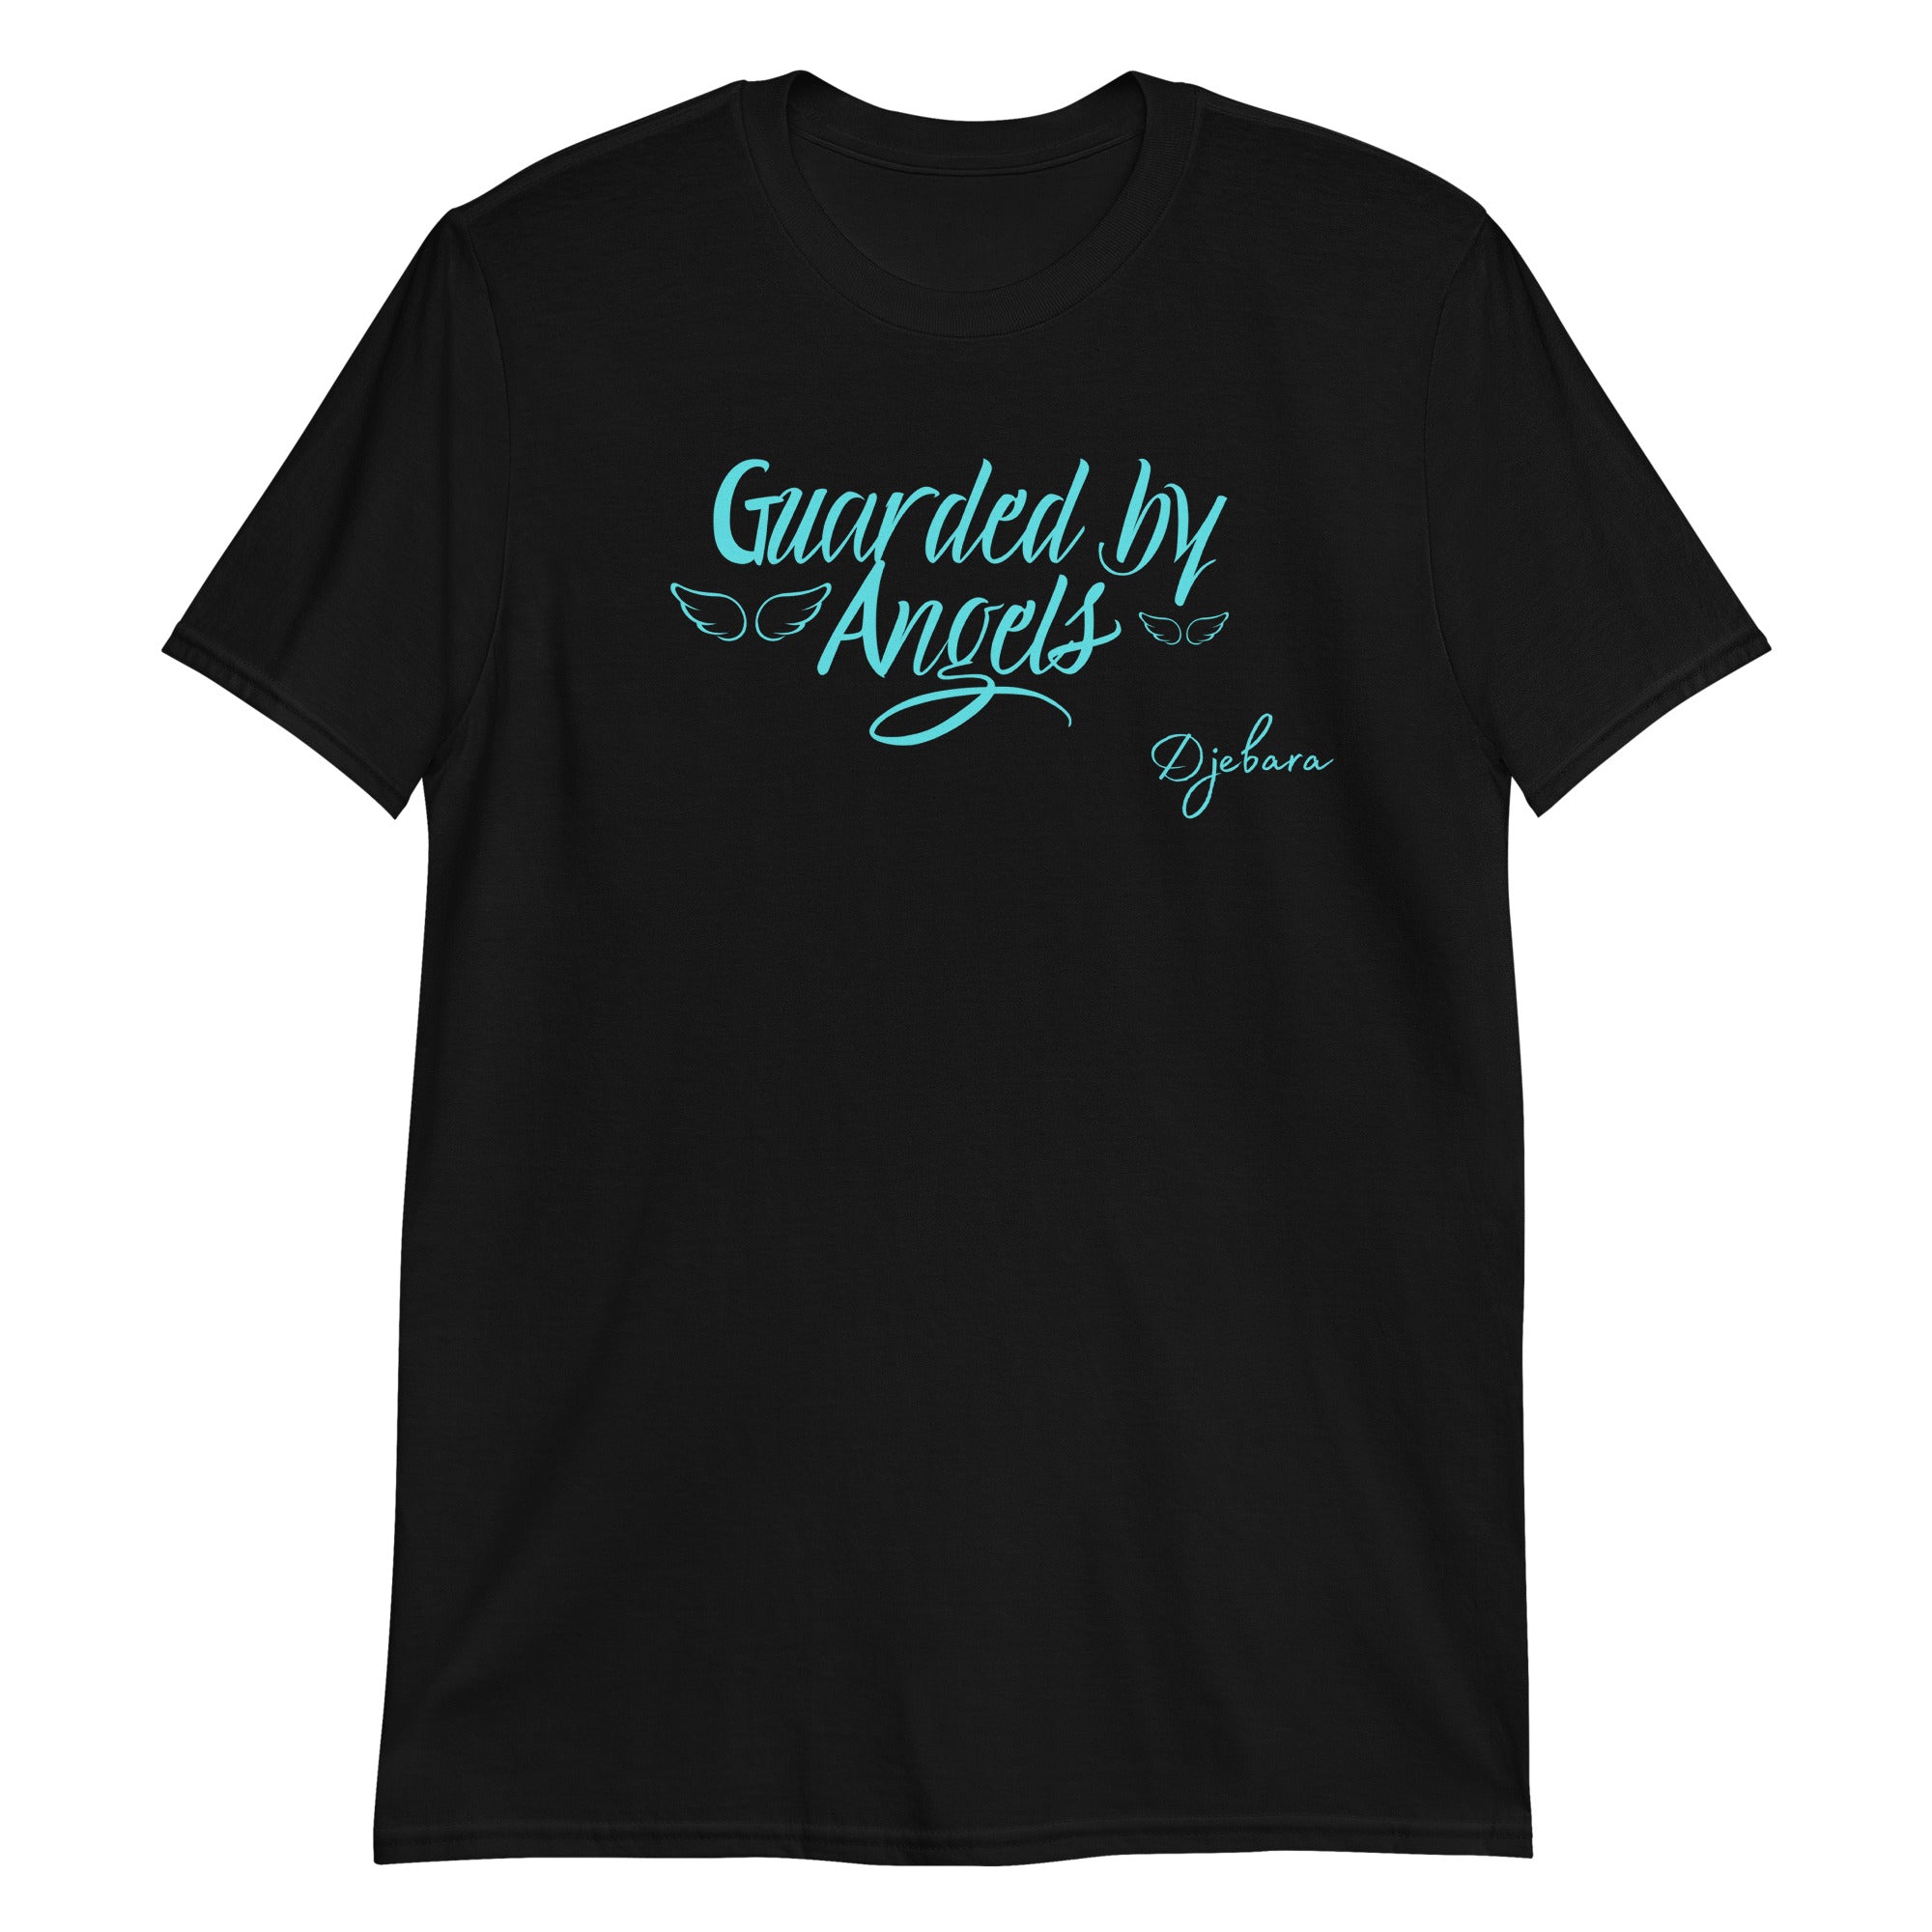 Black Guarded by Angels Gildan Short-Sleeve Unisex T-Shirt S-(A-Wings) 3XL